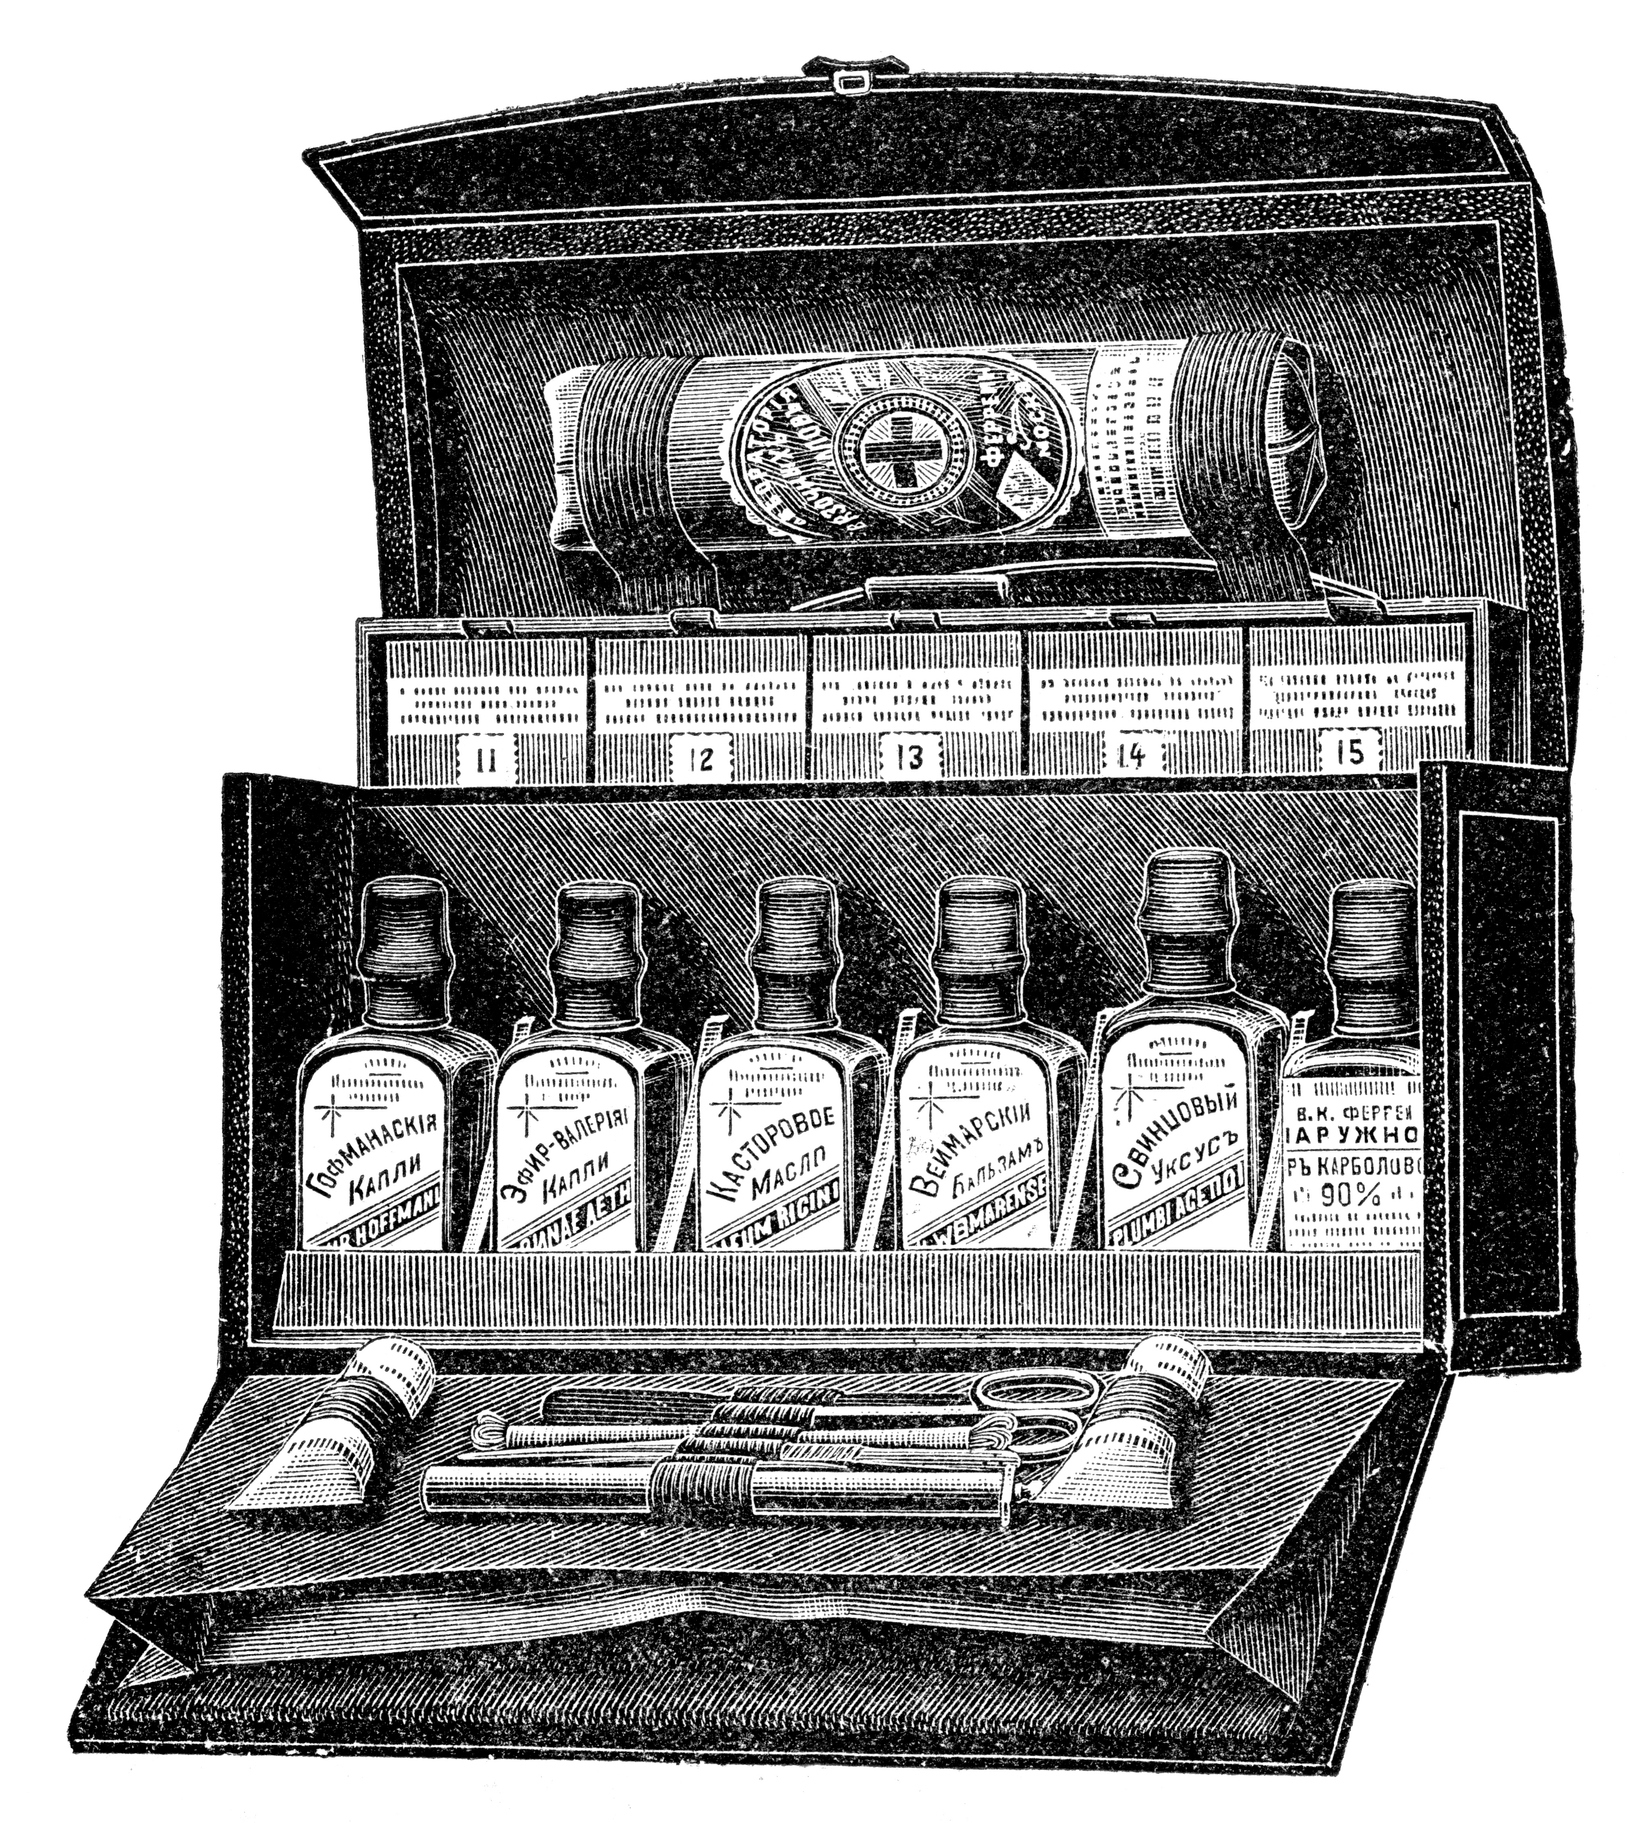 A rendering of an apothecary bag